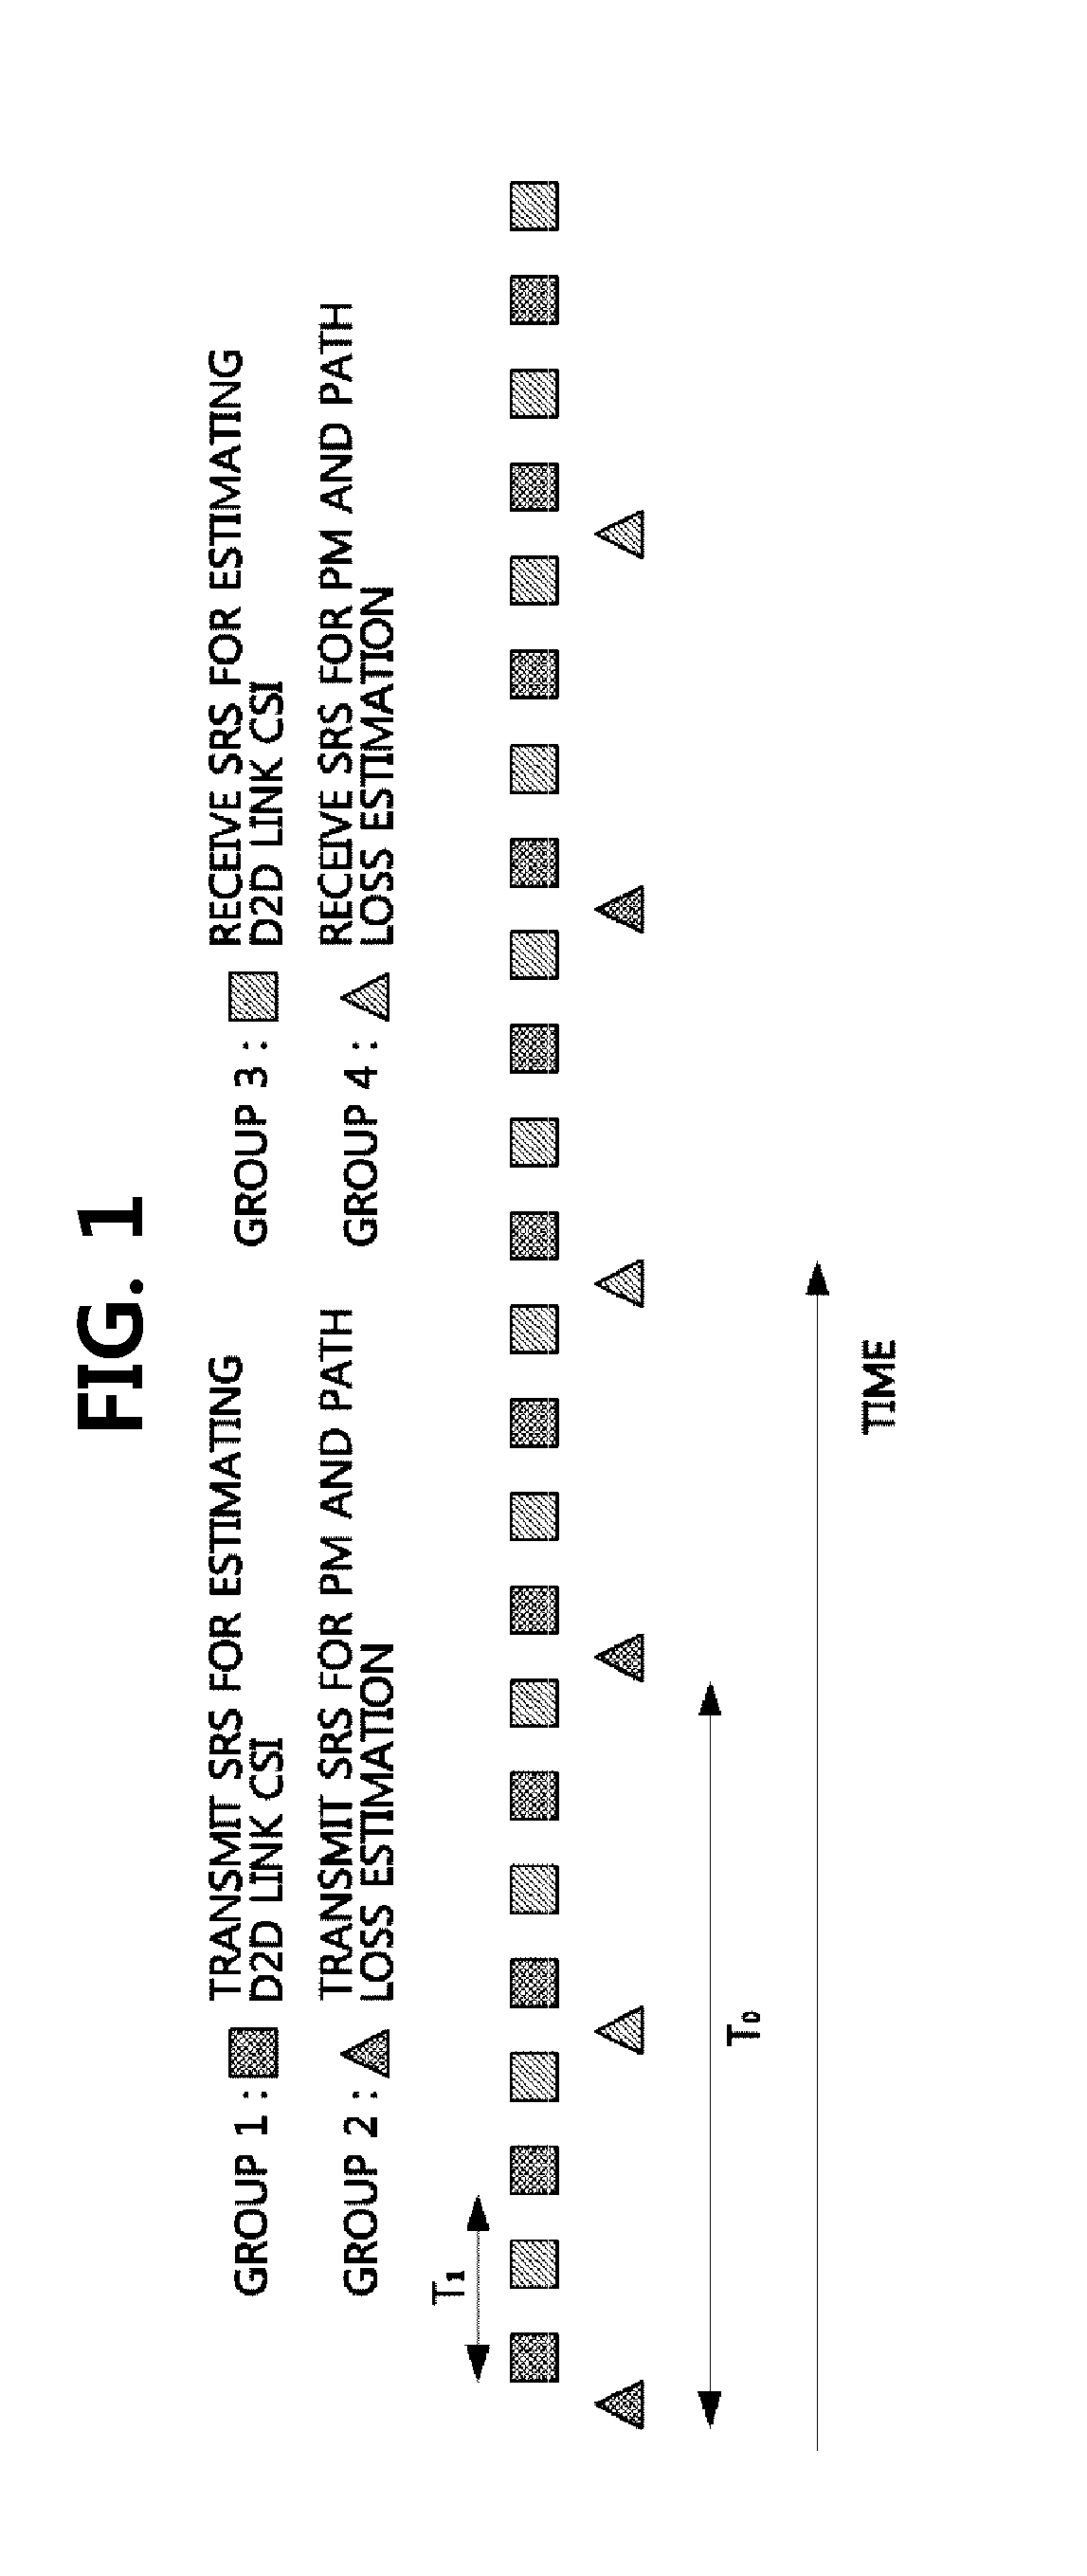 Device to device communication method using partial device control